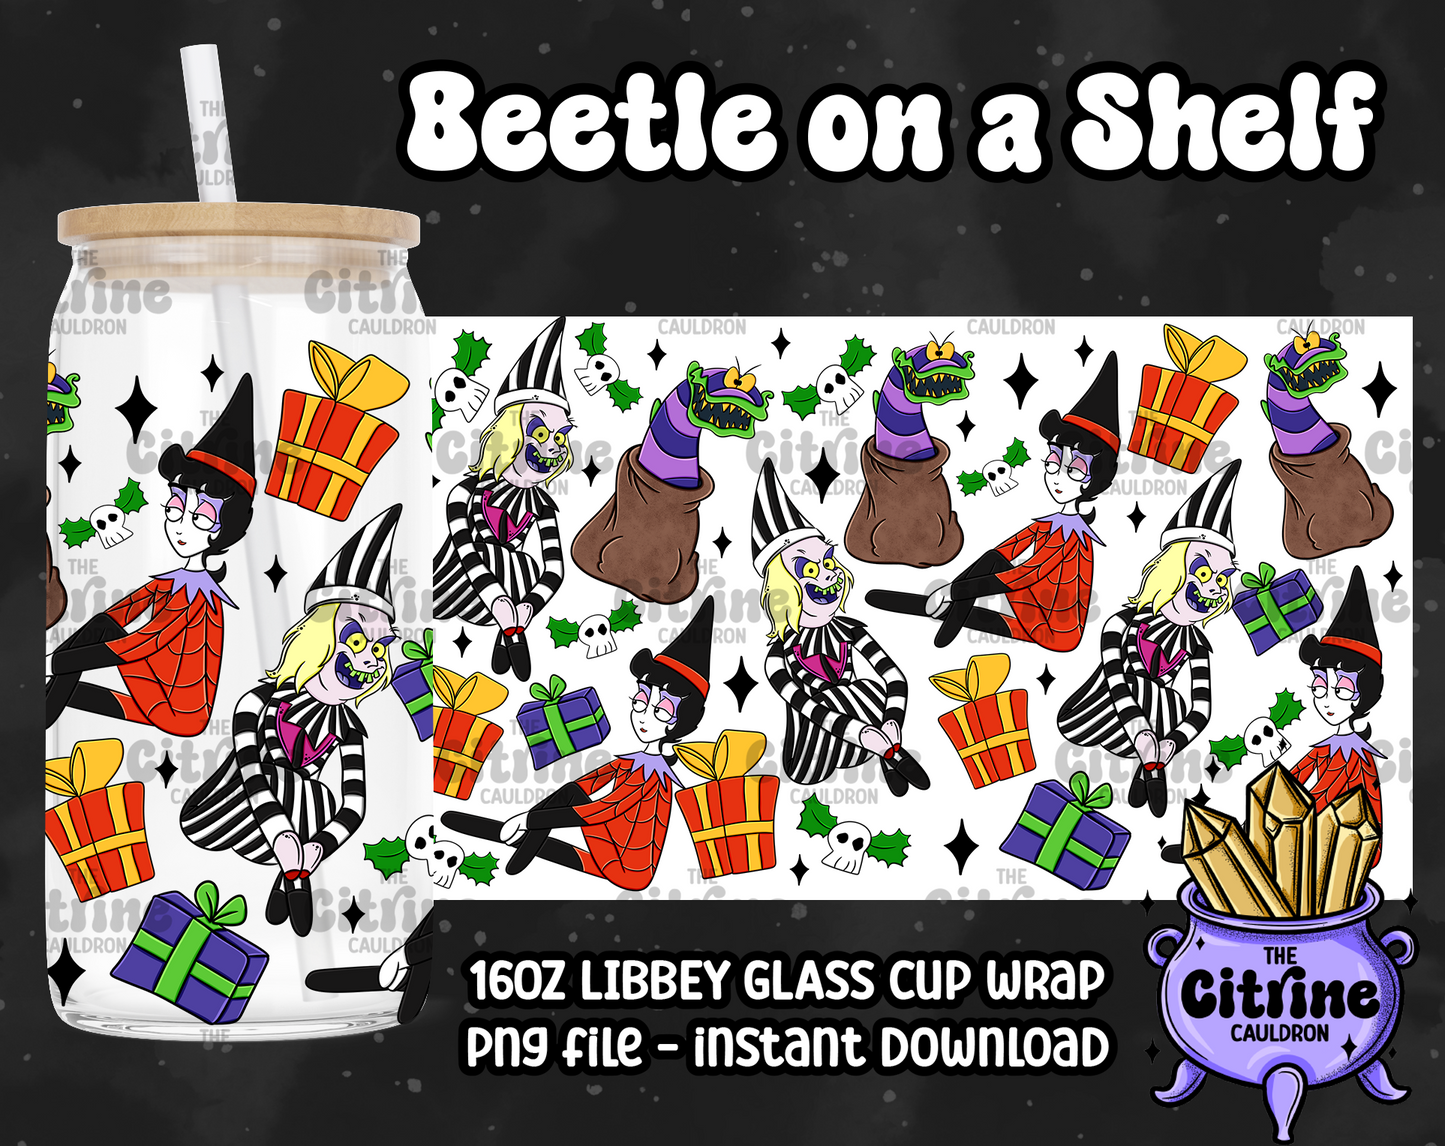 Beetle on a Shelf - PNG Wrap for Libbey 16oz Glass Can